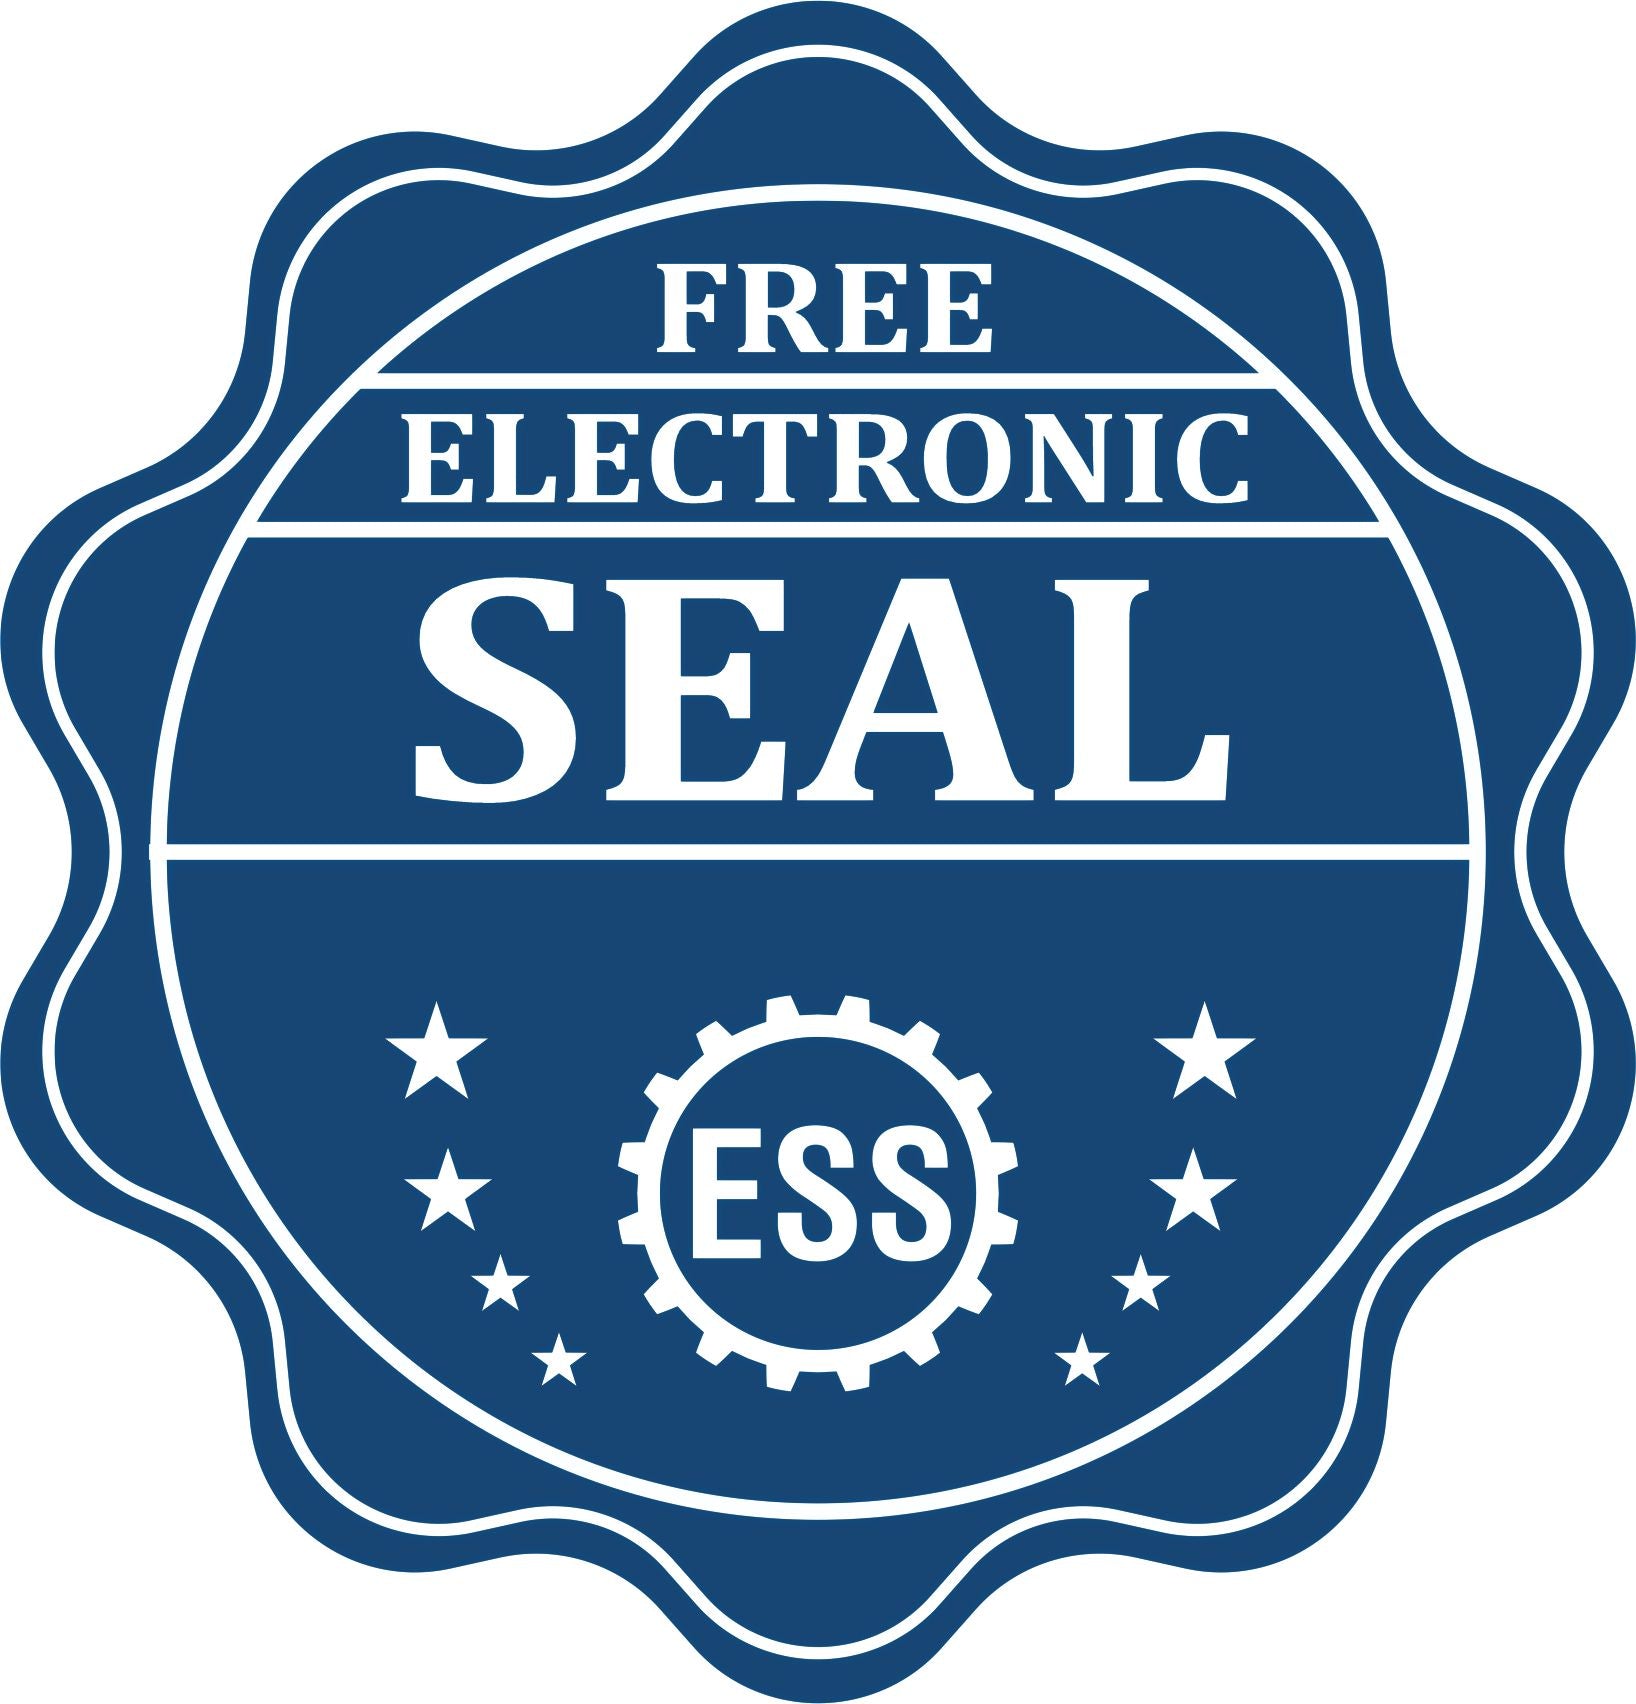 A badge showing a free electronic seal for the Handheld Illinois Professional Engineer Embosser with stars and the ESS gear on the emblem.